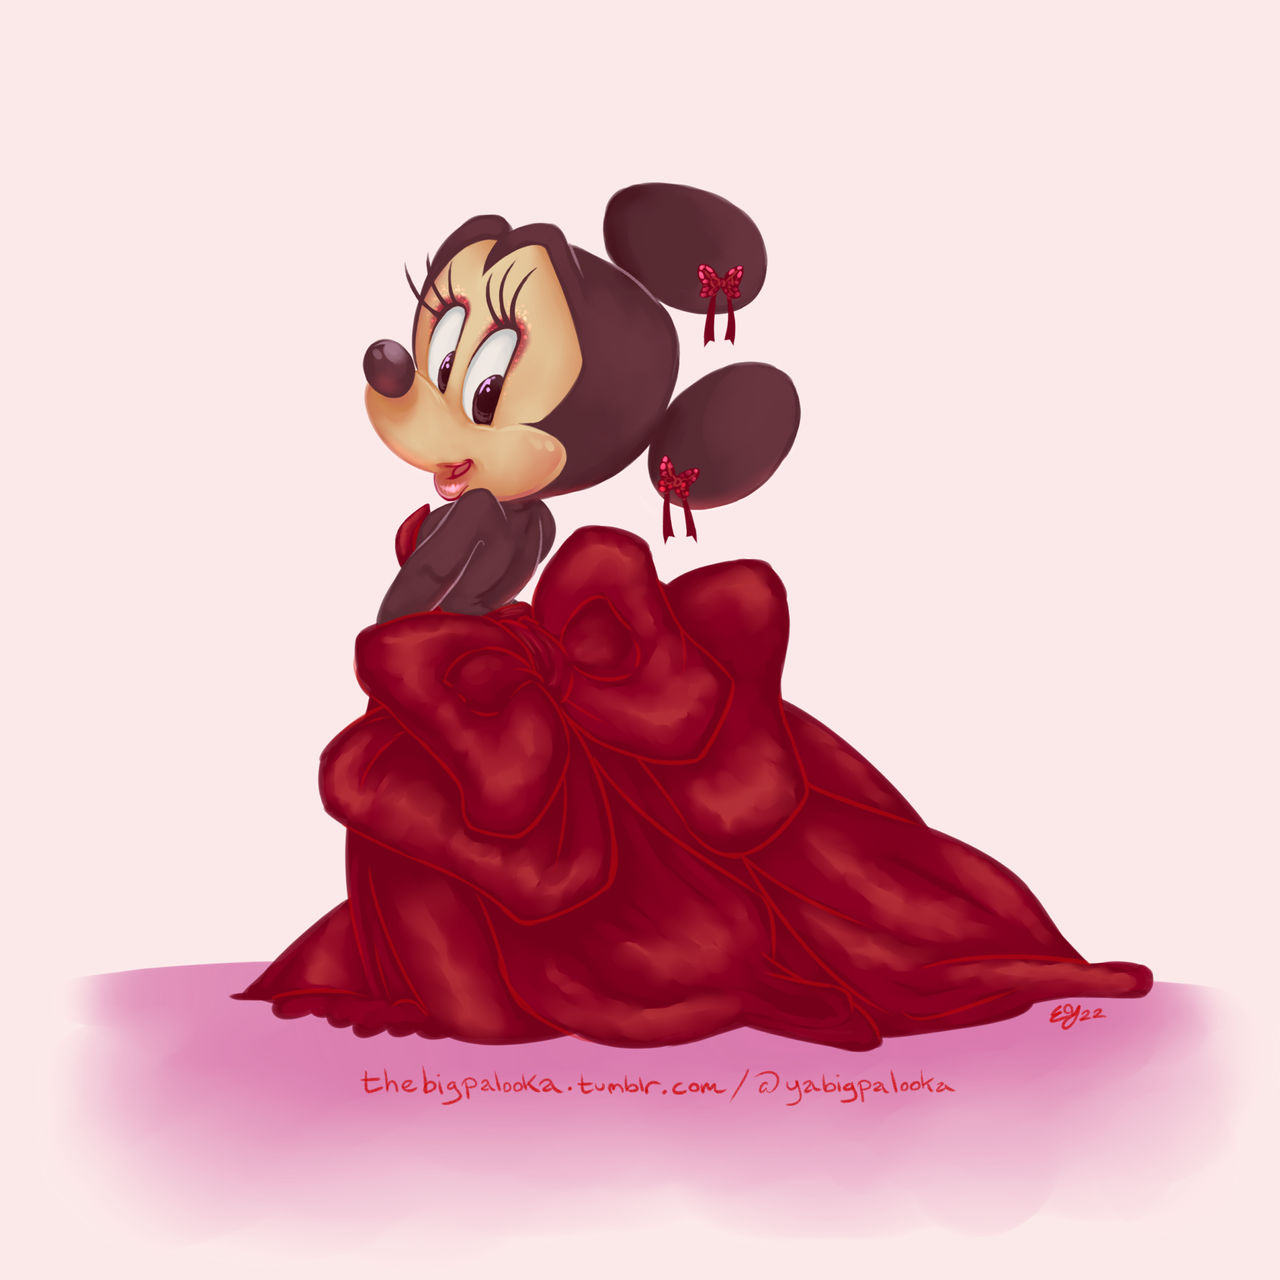 Blushing Bride Minnie Mouse by LadyIlona1984 on deviantART